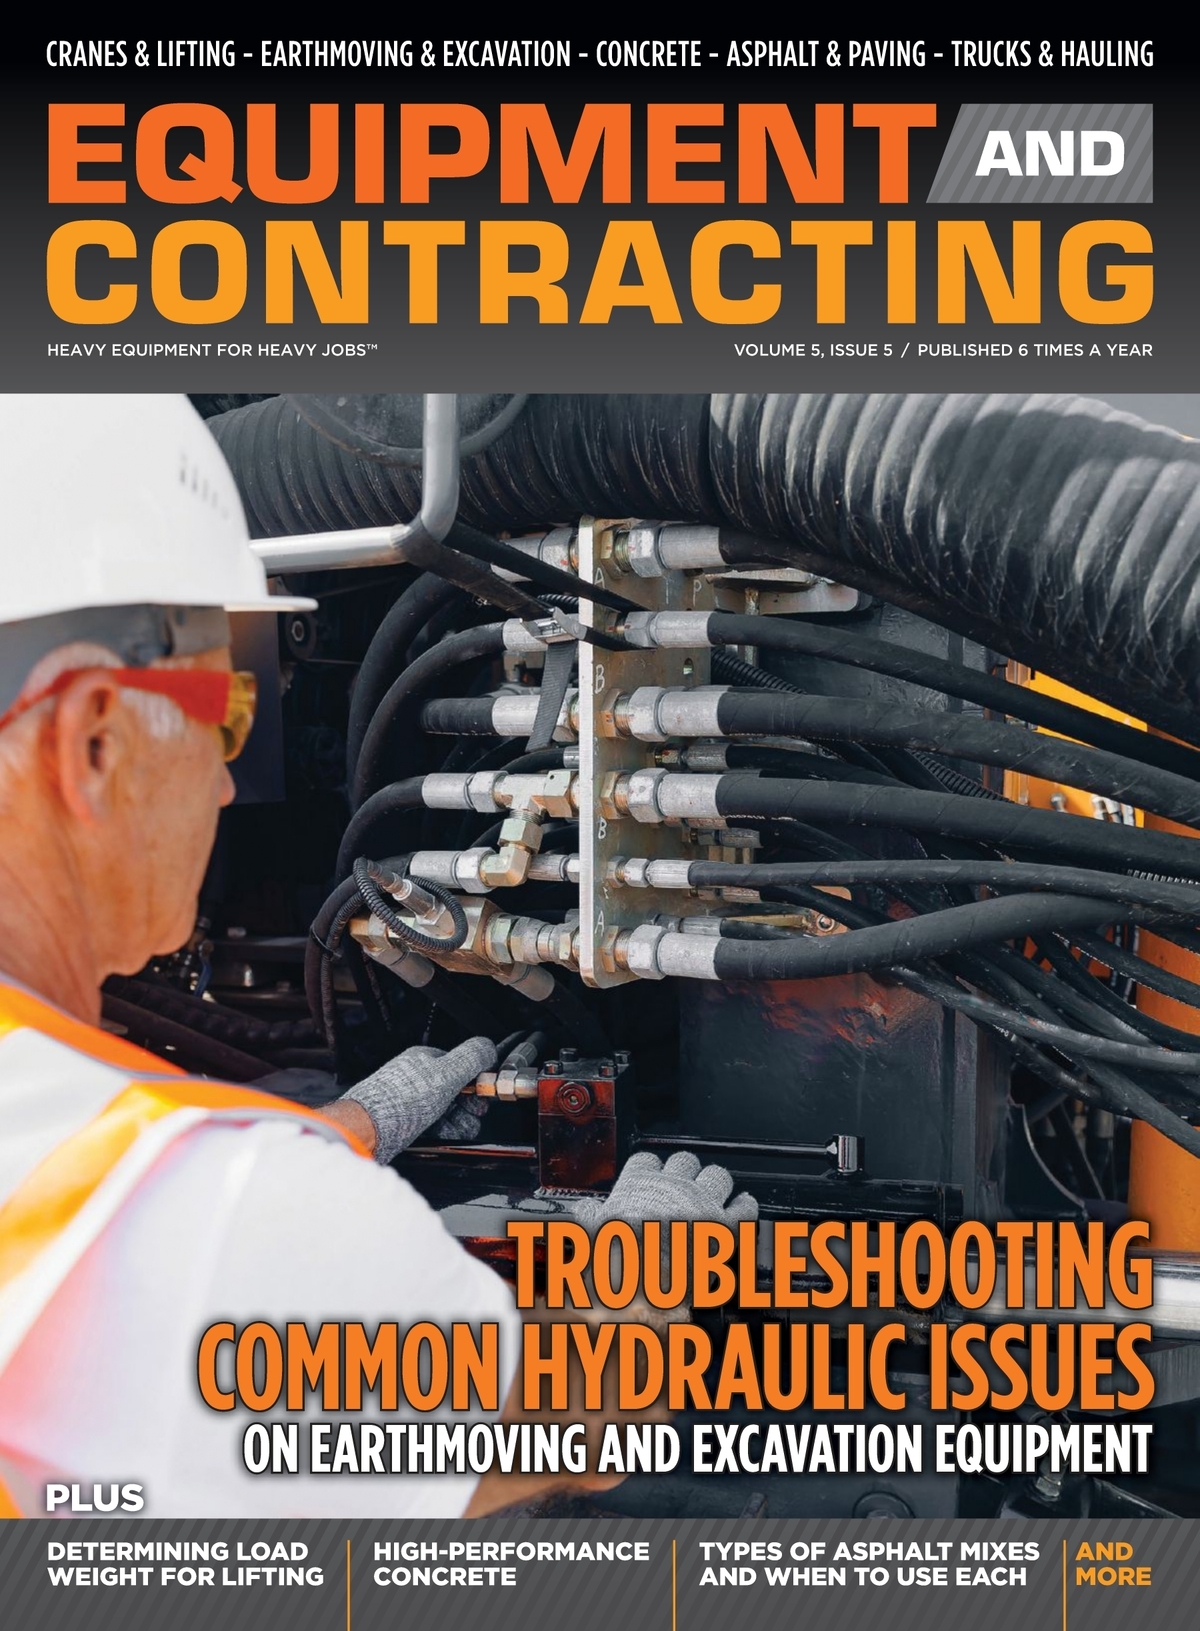 Troubleshooting Common Hydraulic Issues